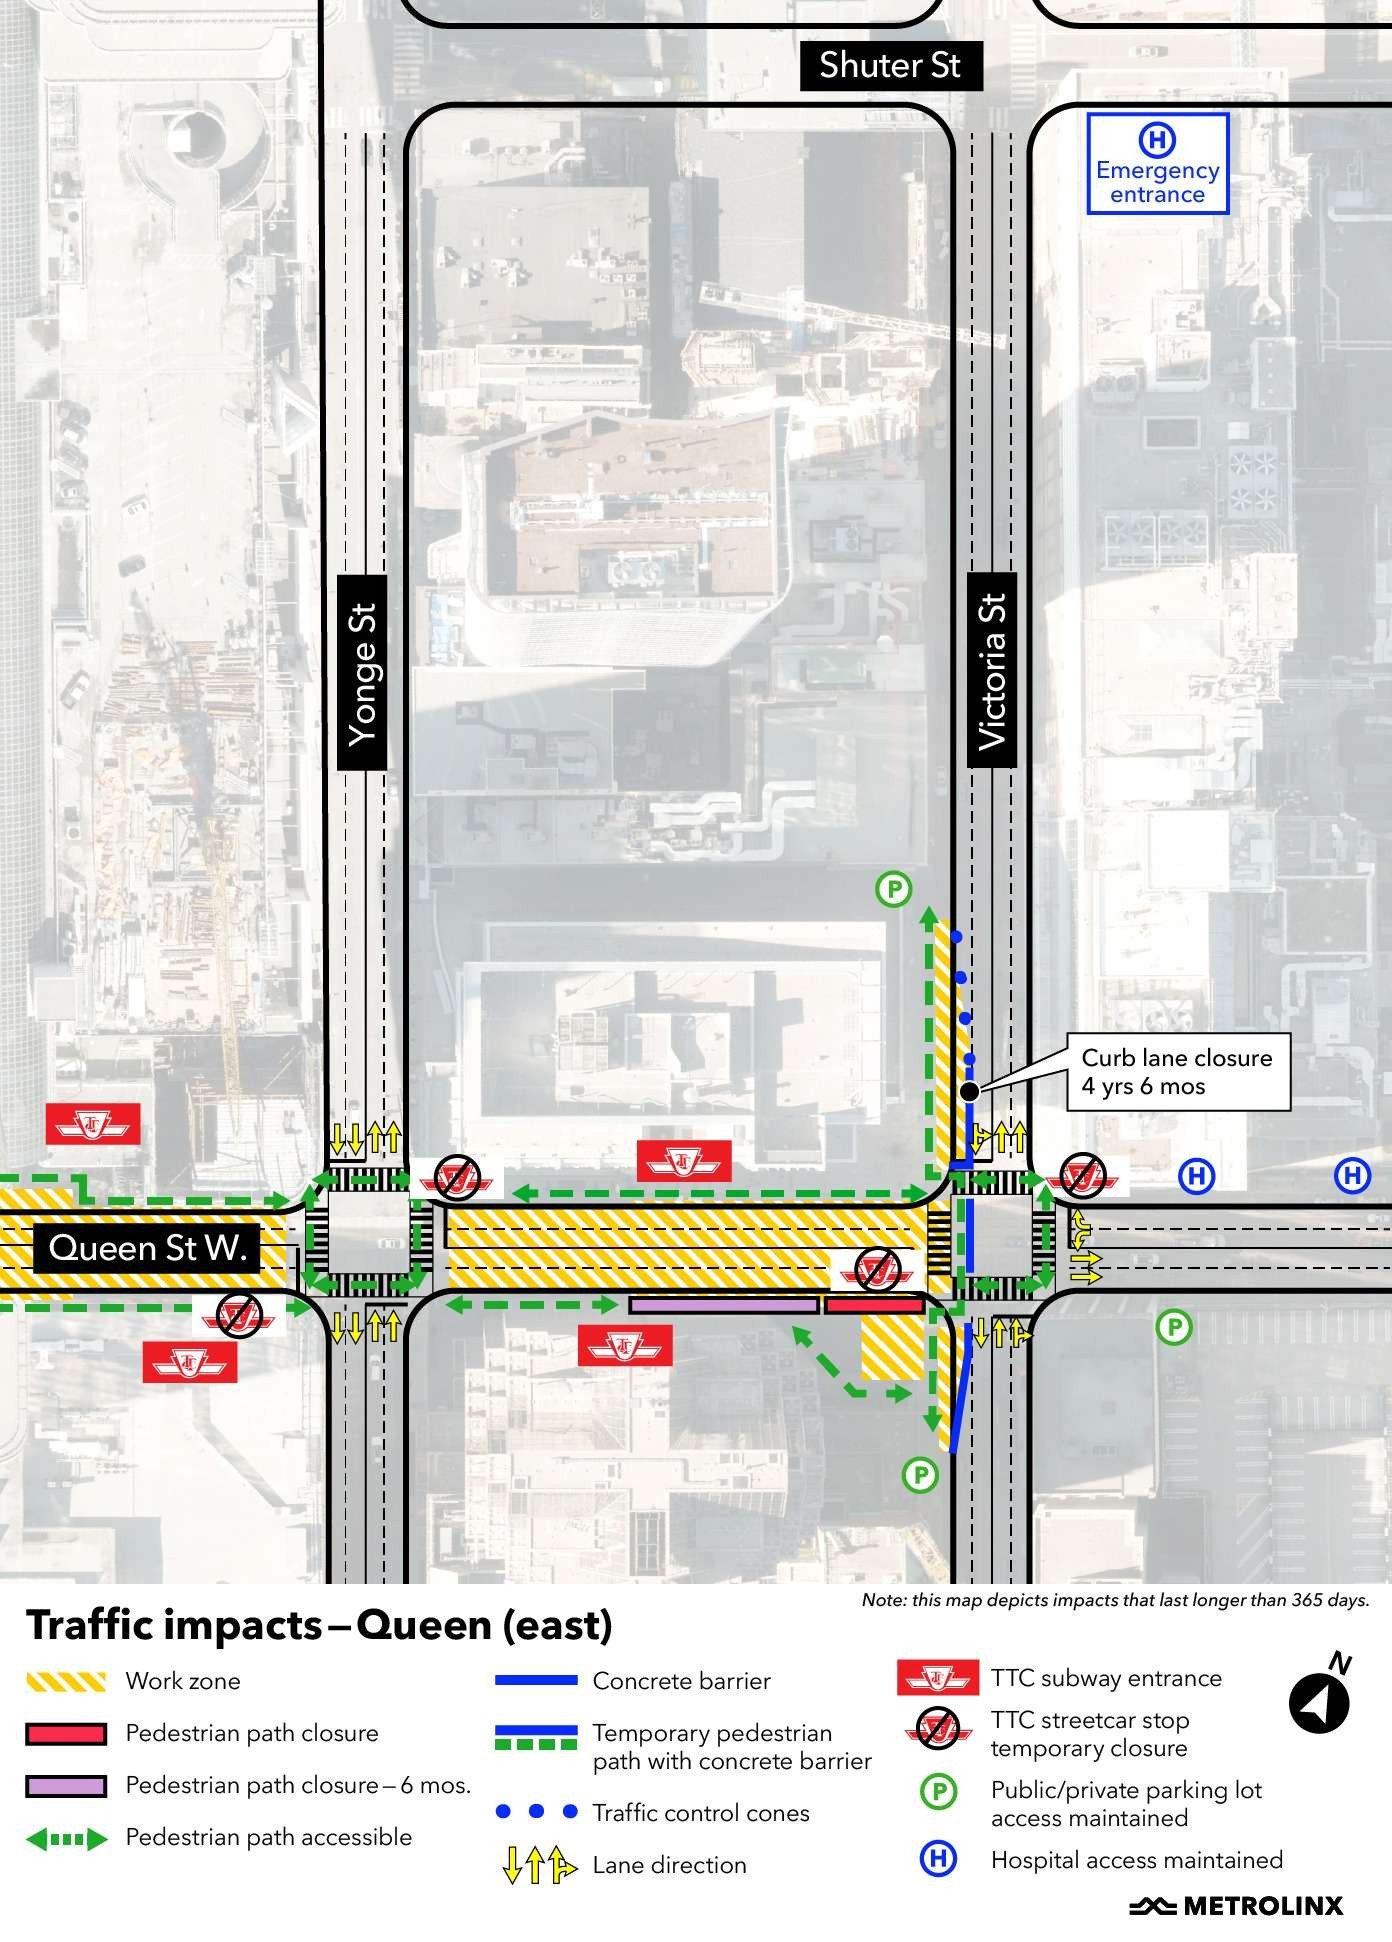 Traffic Impacts - Queen Station East